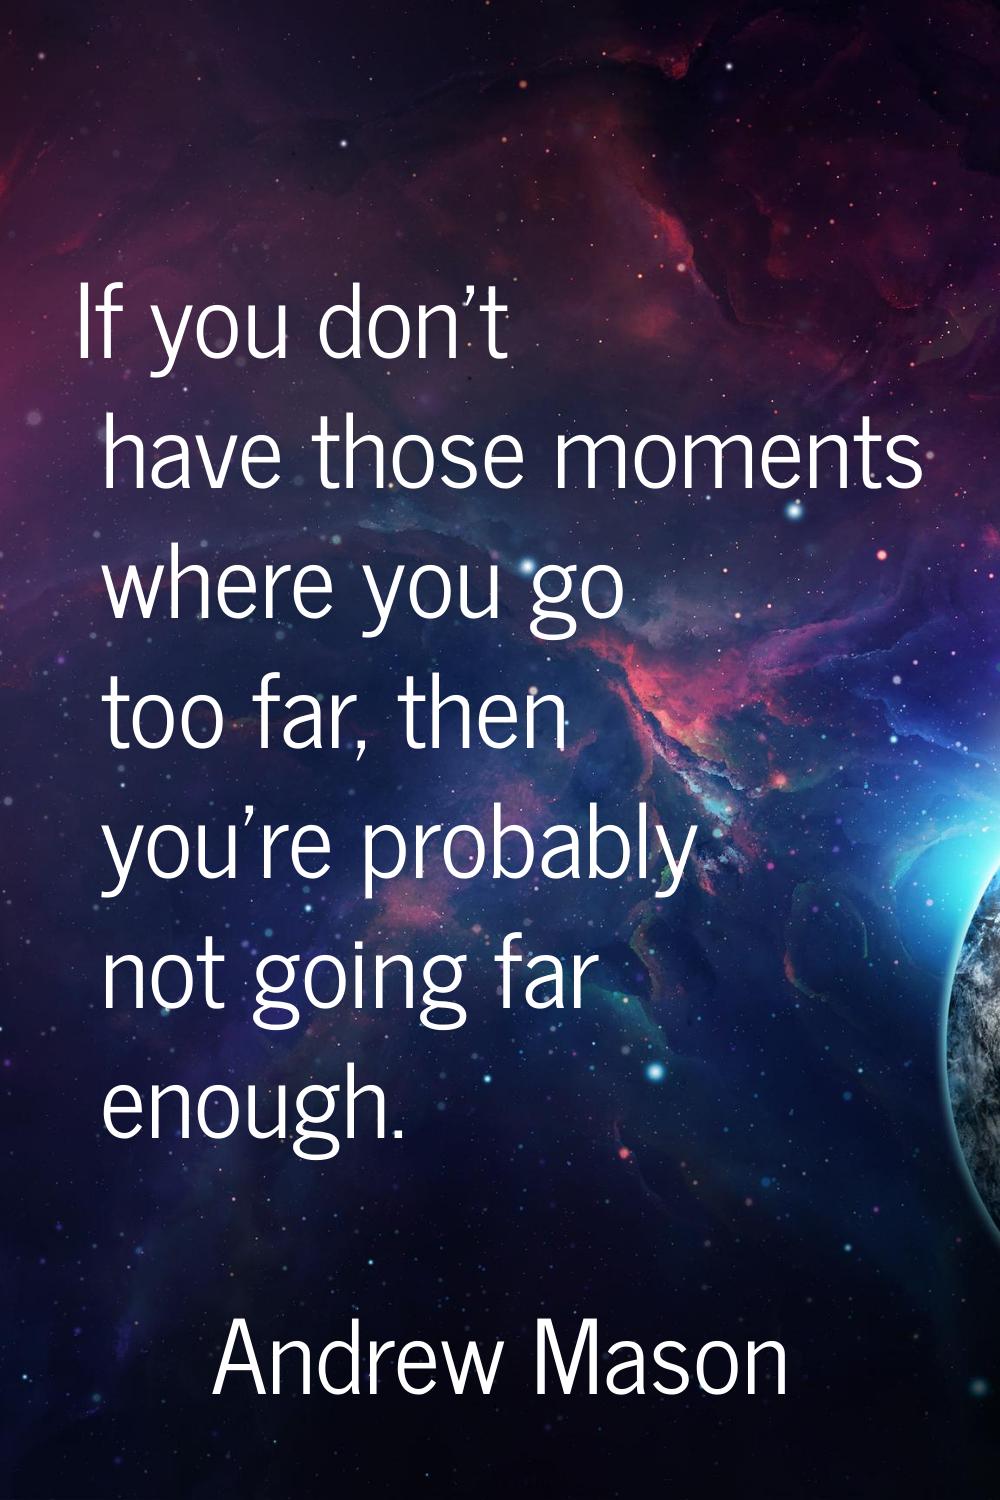 If you don't have those moments where you go too far, then you're probably not going far enough.